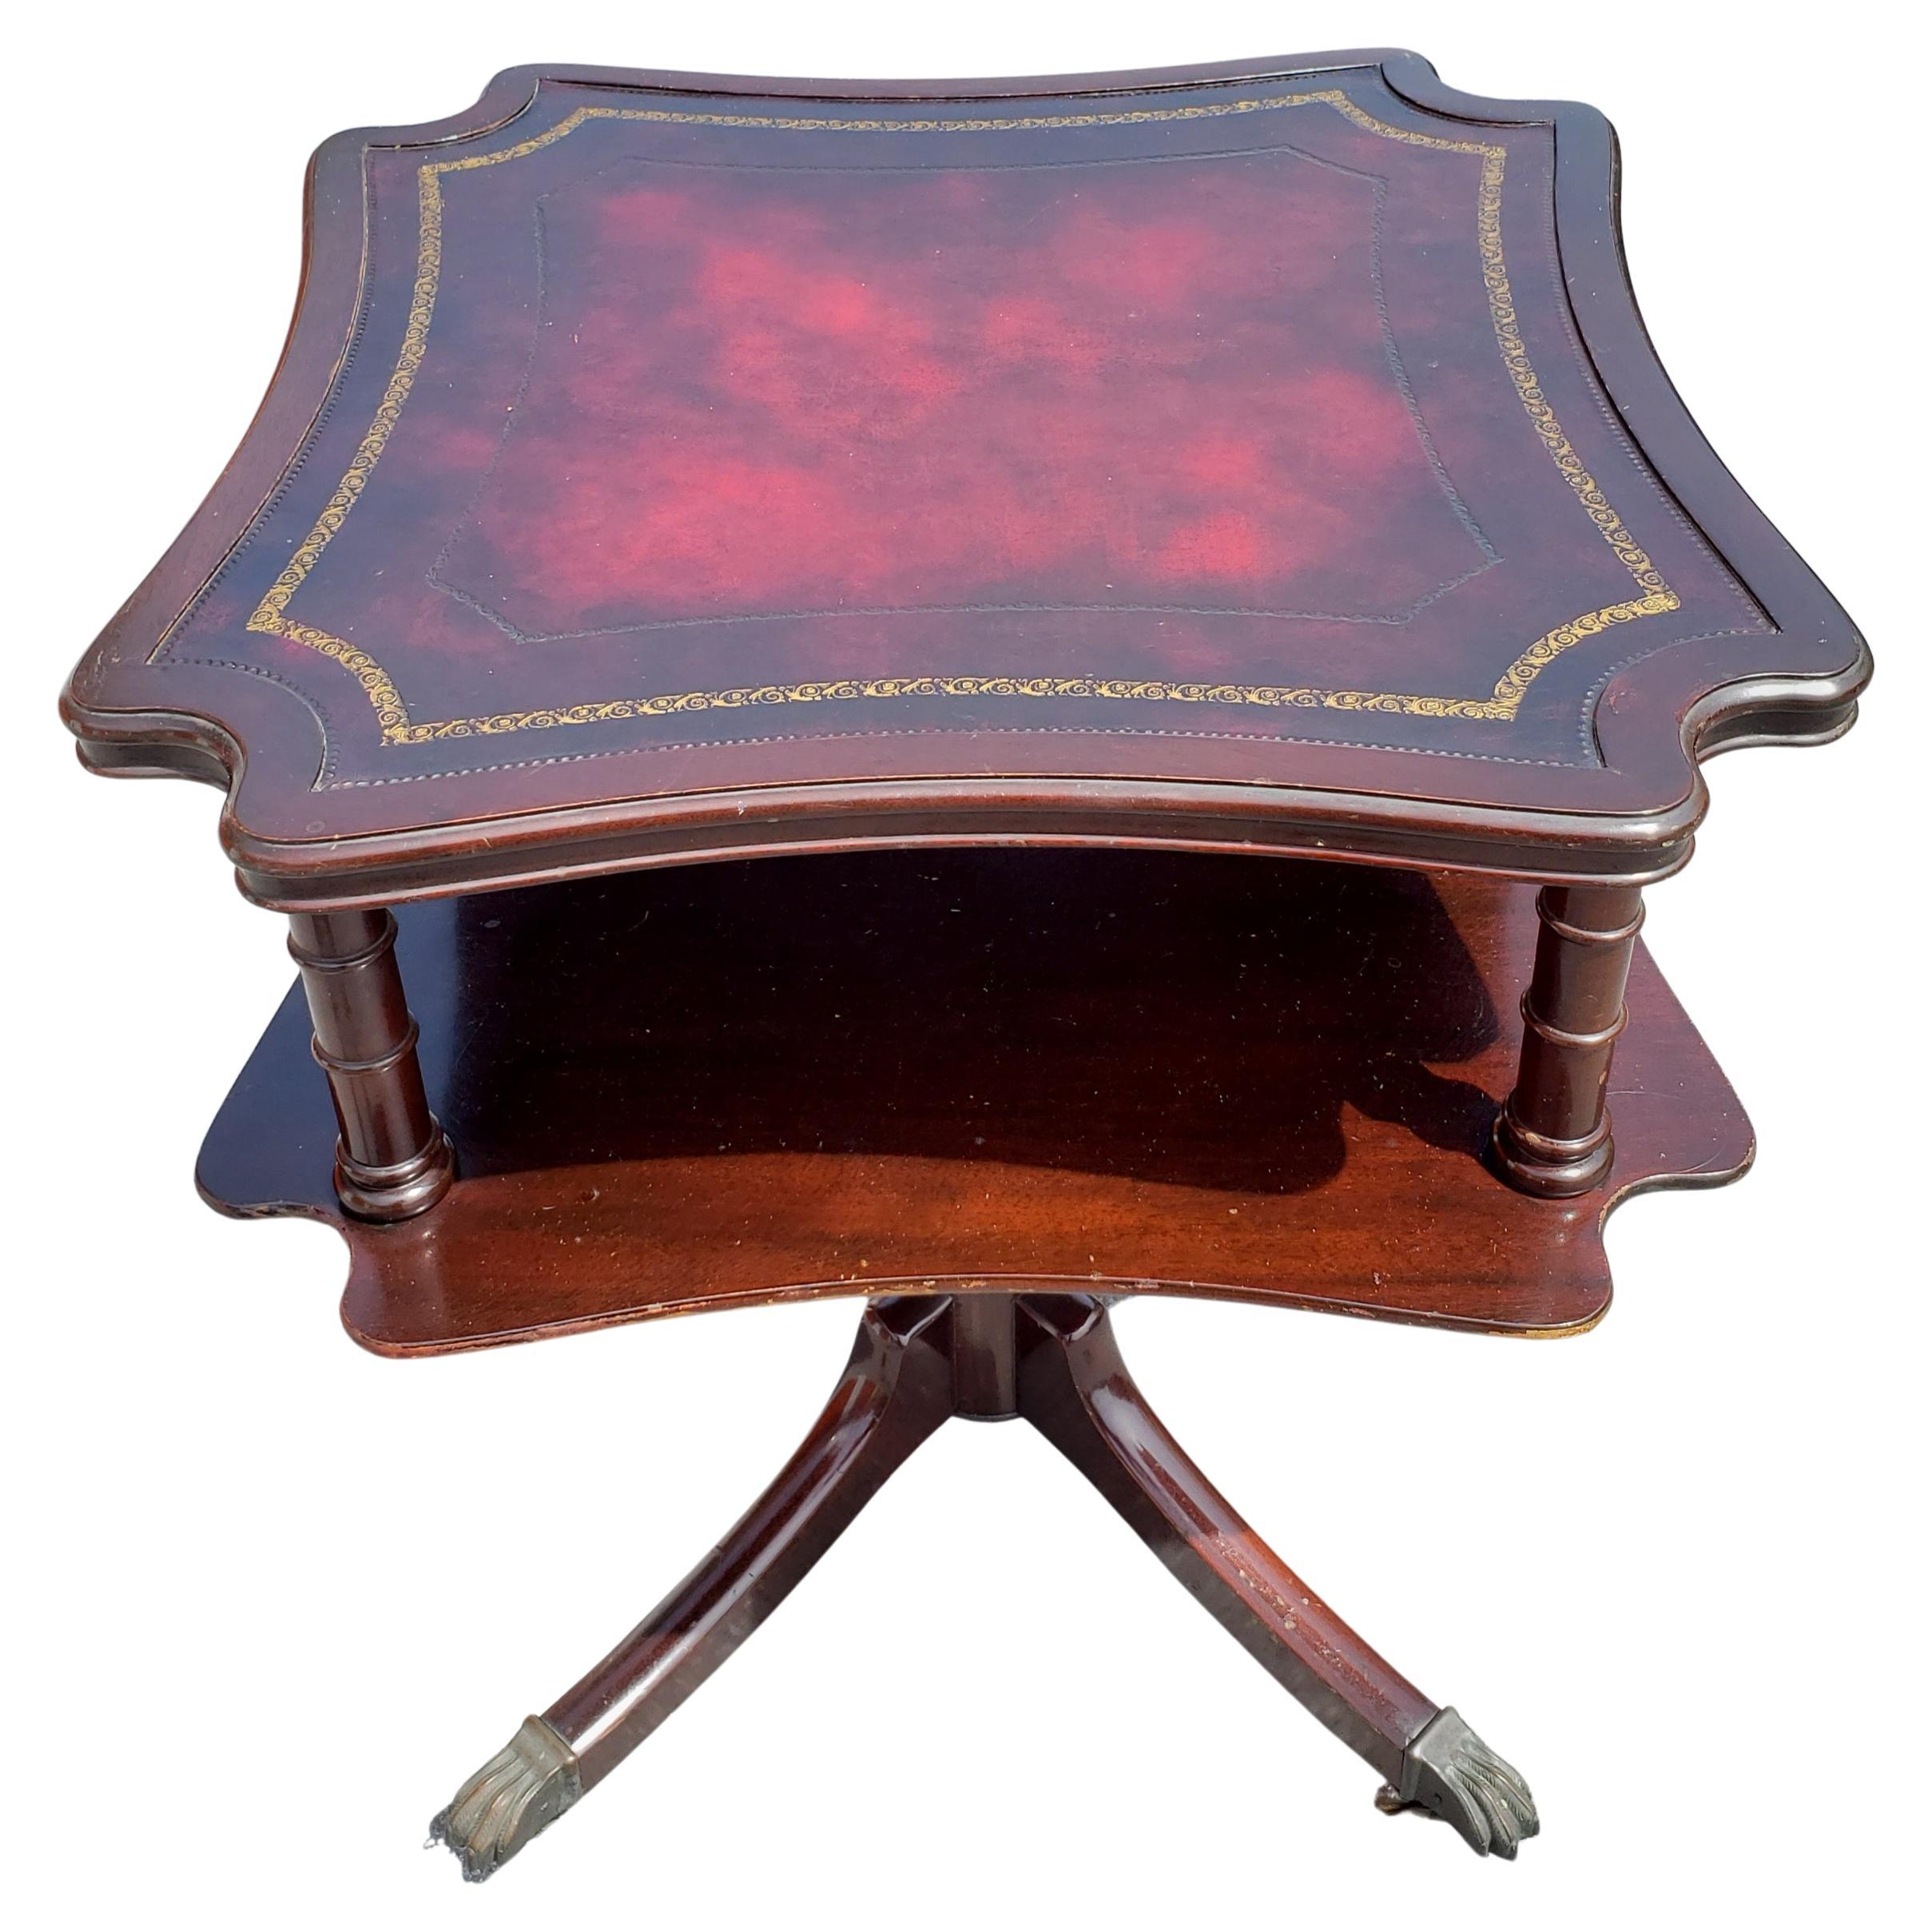 French Regency Style Two-Tier Red Leather Top Mahogany Tea Table In Good Condition For Sale In Germantown, MD